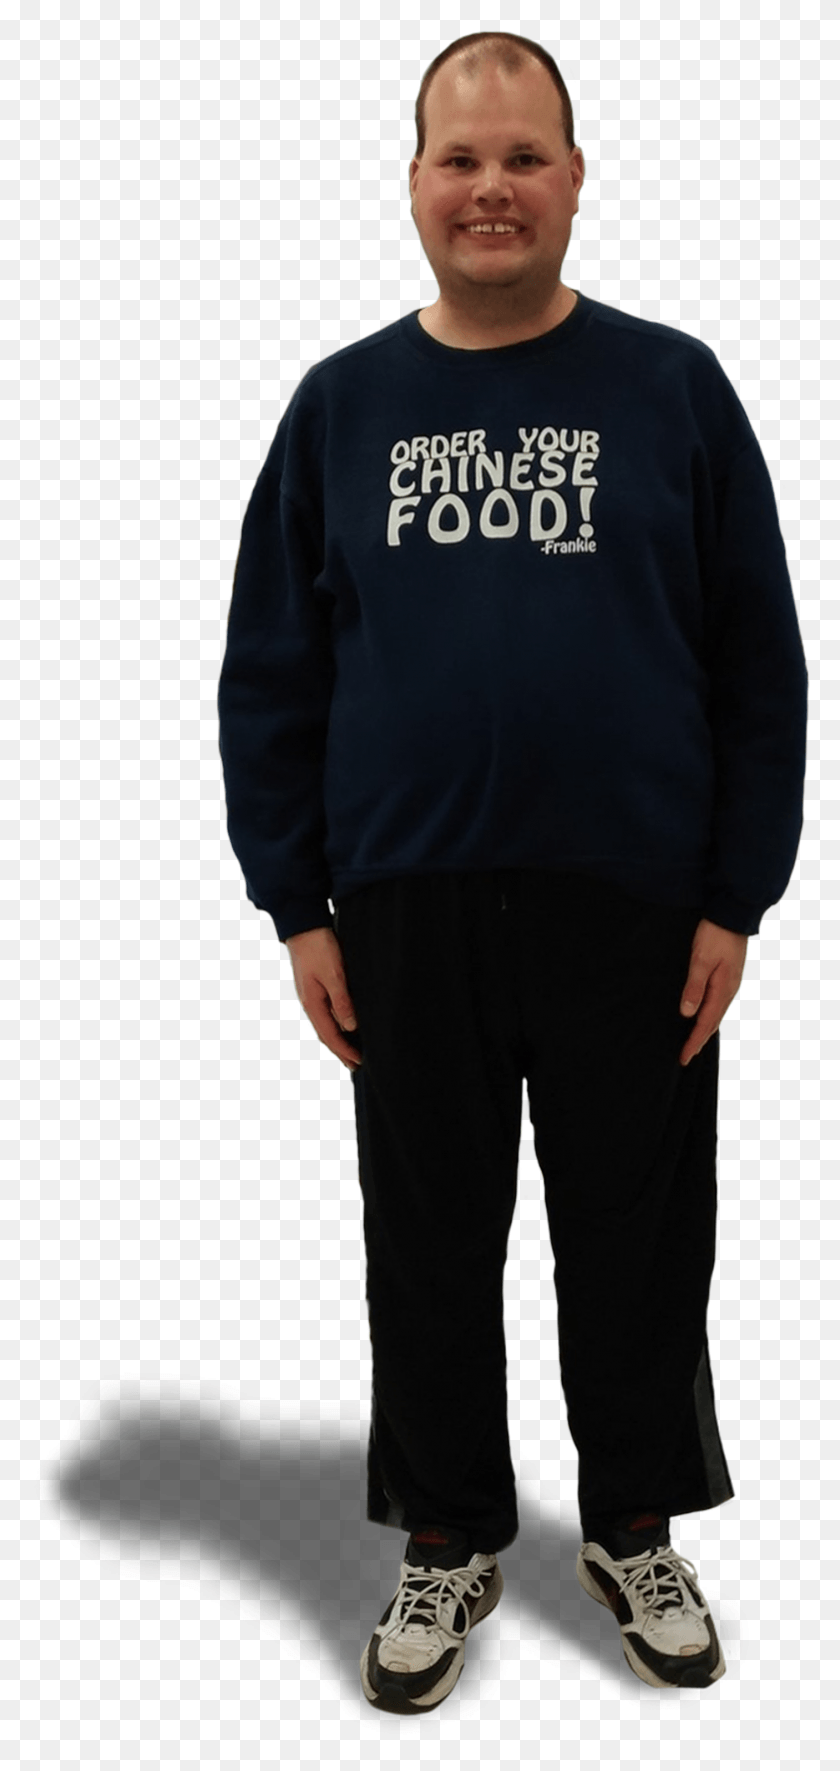 1406x3085 Face Reveal 1 Año 6 Meses Hace Frankie Macdonald, Ropa, Vestimenta, Persona Hd Png